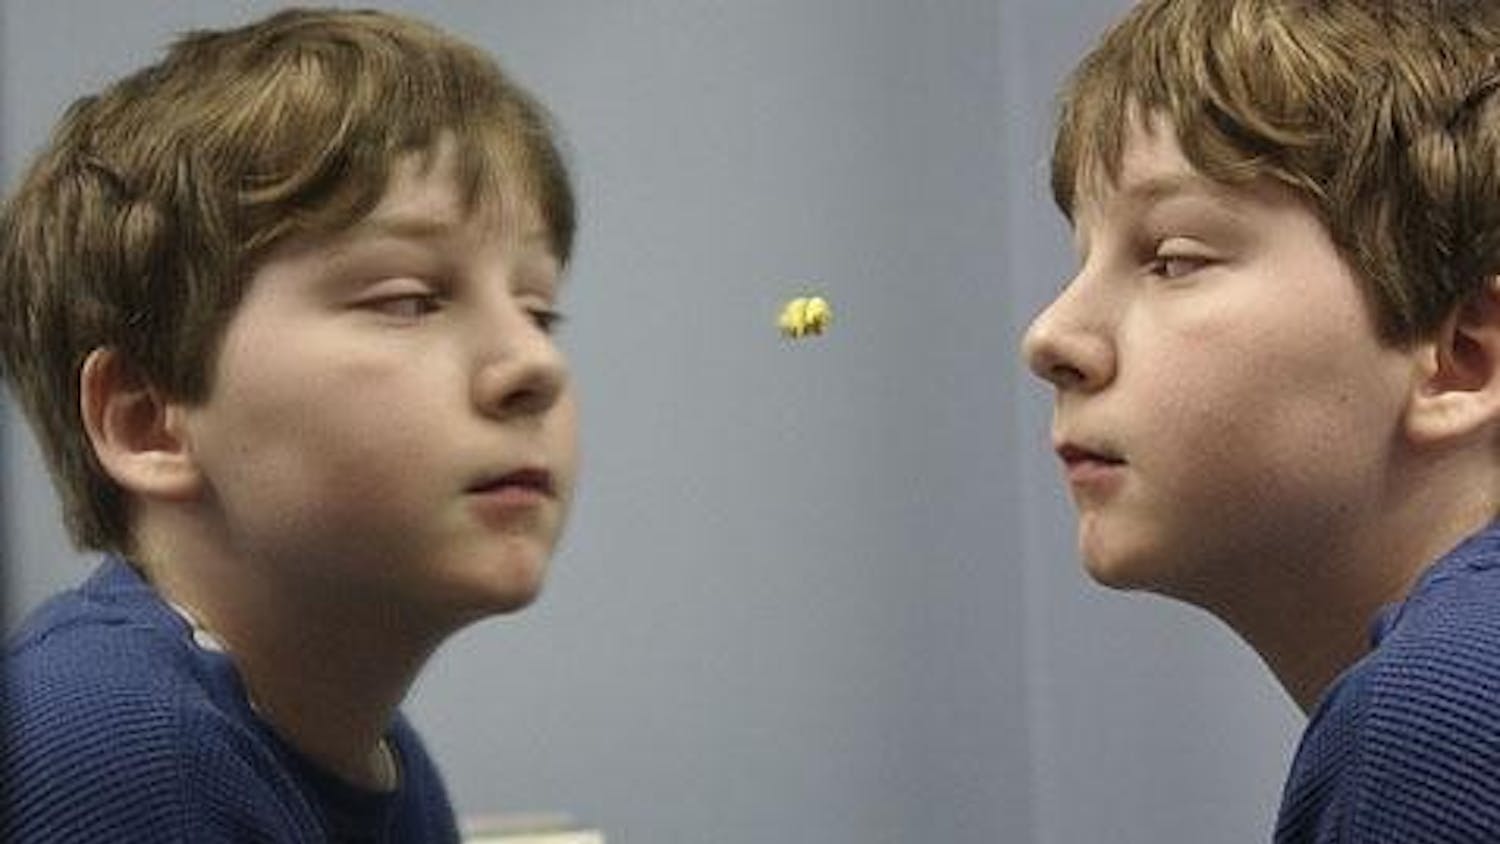 Ezra Robinson, 11, engages himself in the mirror during a speech therapy session. Ezra began exhibiting signs of autism when he was 2 years old and has since been diagnosed in the middle of the autism spectrum.